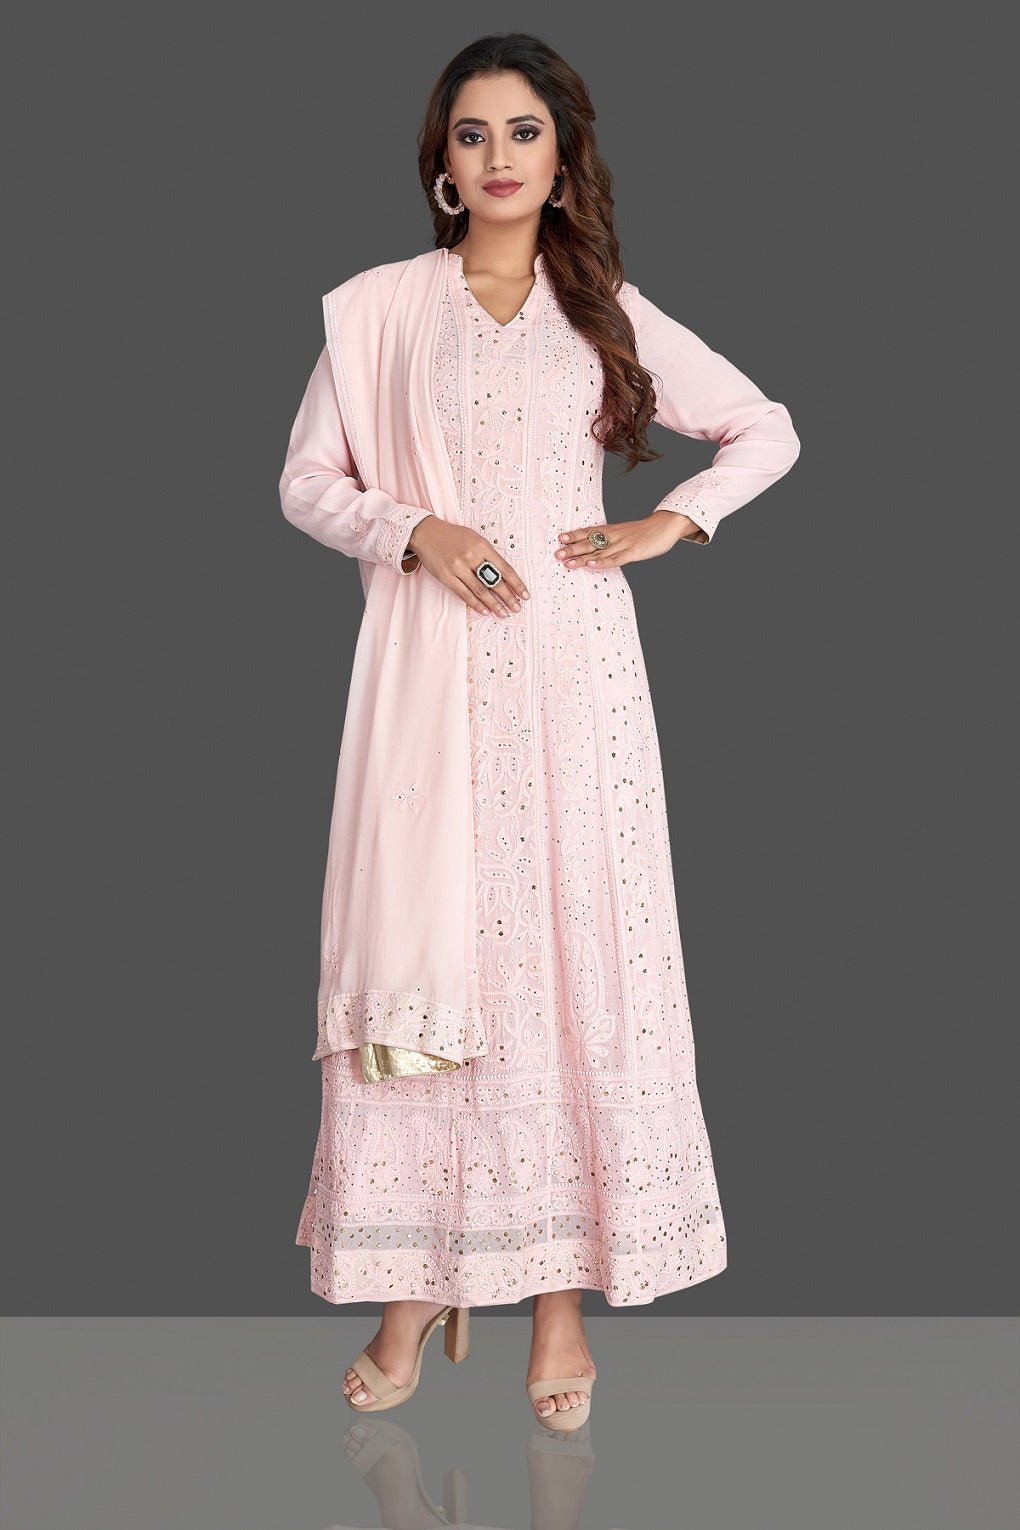 Shop beautiful powder pink Lucknowi chikankari work georgette Anarkali suit online in USA. Flaunt your sartorial choice with beautiful embroidered Anarkali, sharara suits, designer lehengas, designer gowns from Pure Elegance Indian saree store in USA.-front